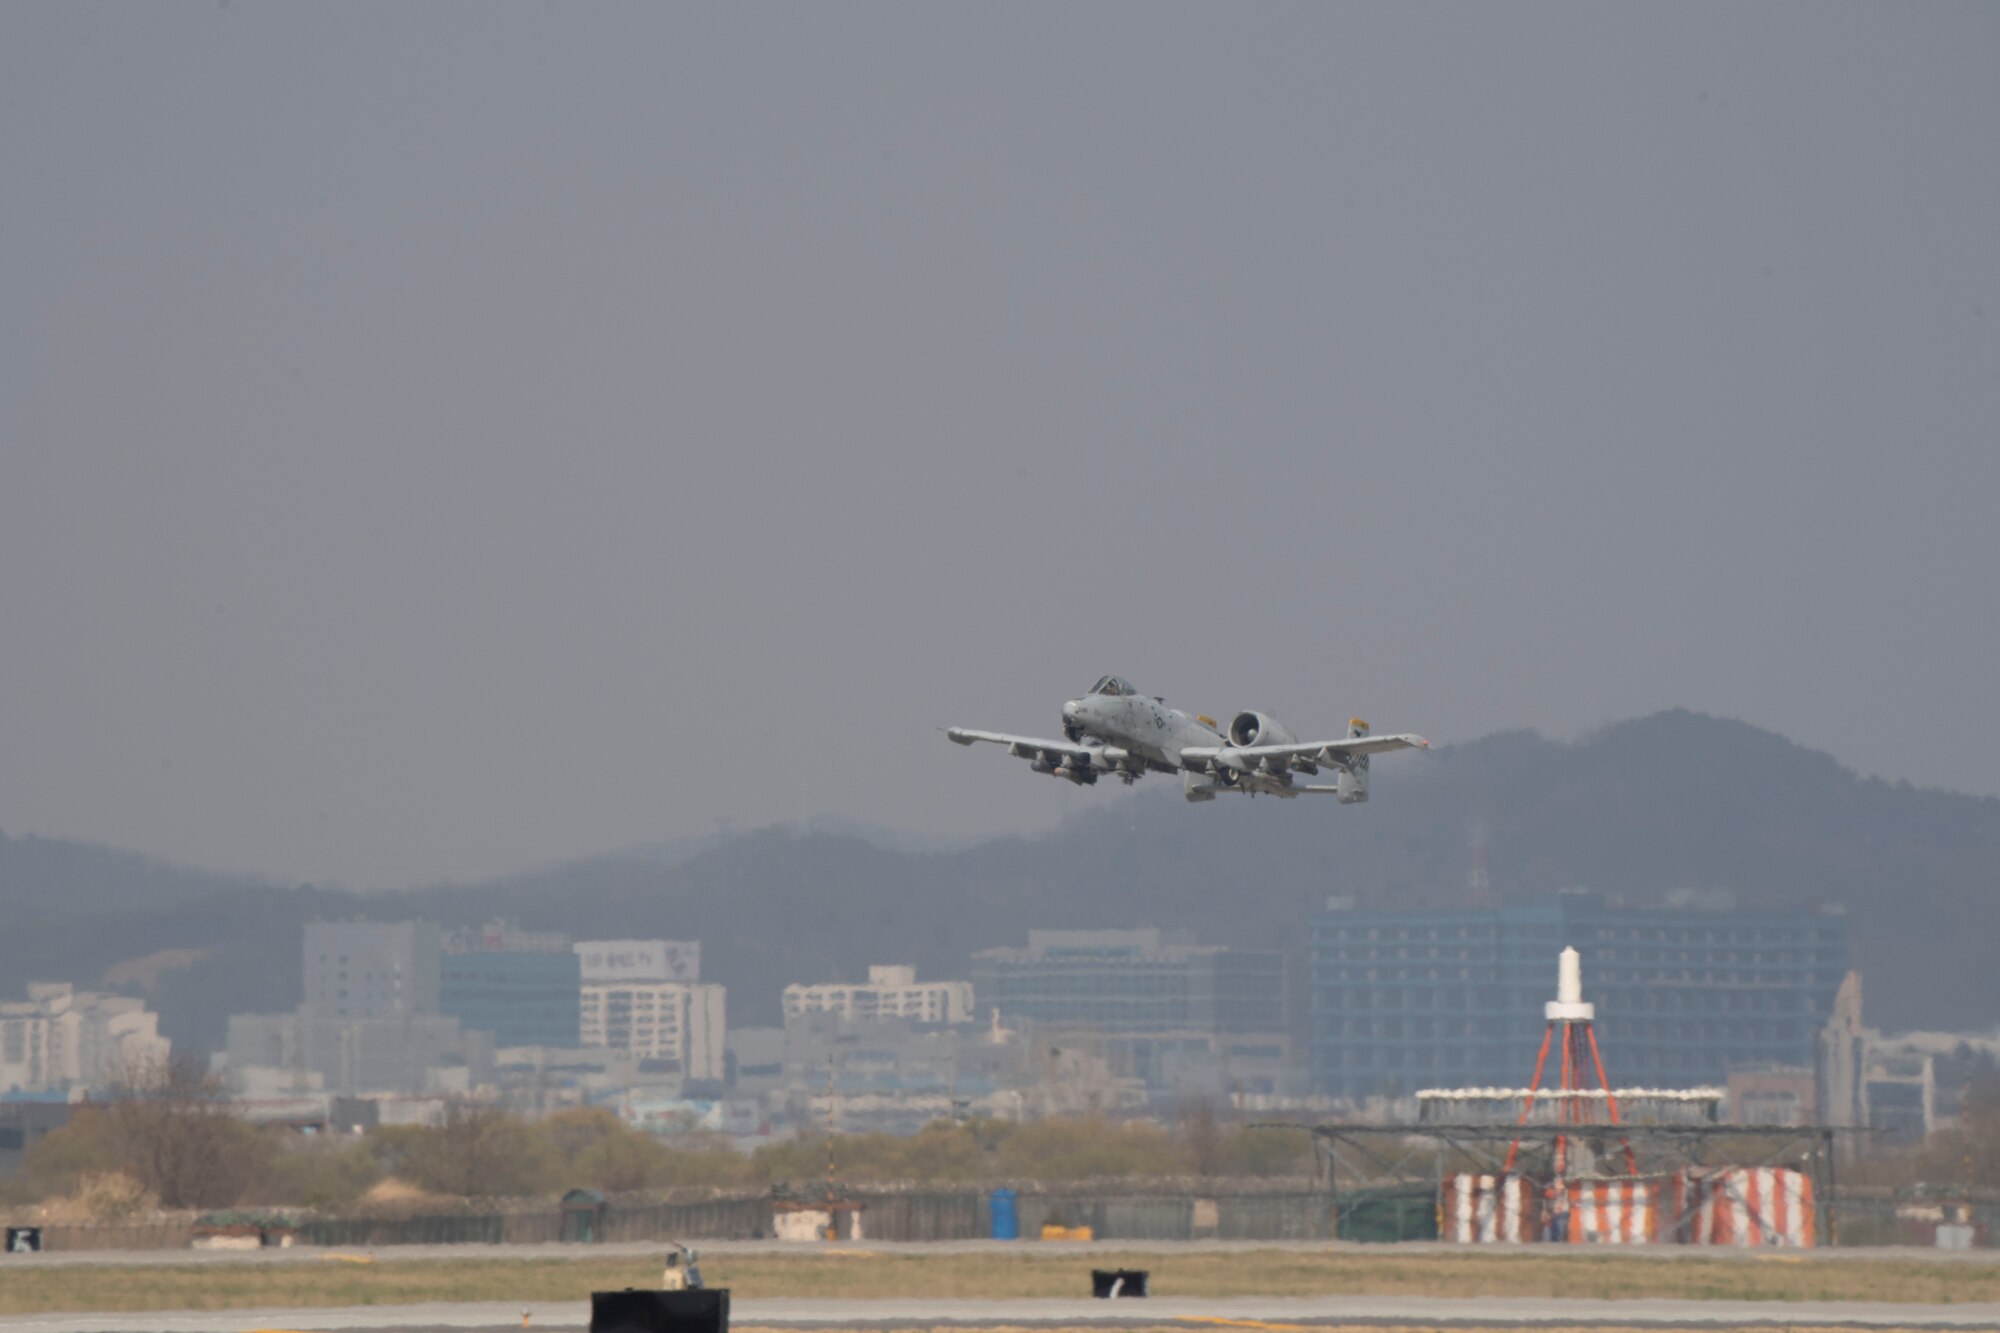 A 25th Fighter Squadron A-10C Thunderbolt II ascends the skies April 9, 2020, at Osan Air Base, Republic of Korea. Amid the COVID-19 global pandemic, the 25th FS follows the United States Forces-Korea’s health protection control measures to preserve their mission capabilities while maintaining a high state of readiness to protect the ROK. (U.S. Air Force photo by Senior Airman Darien Perez)